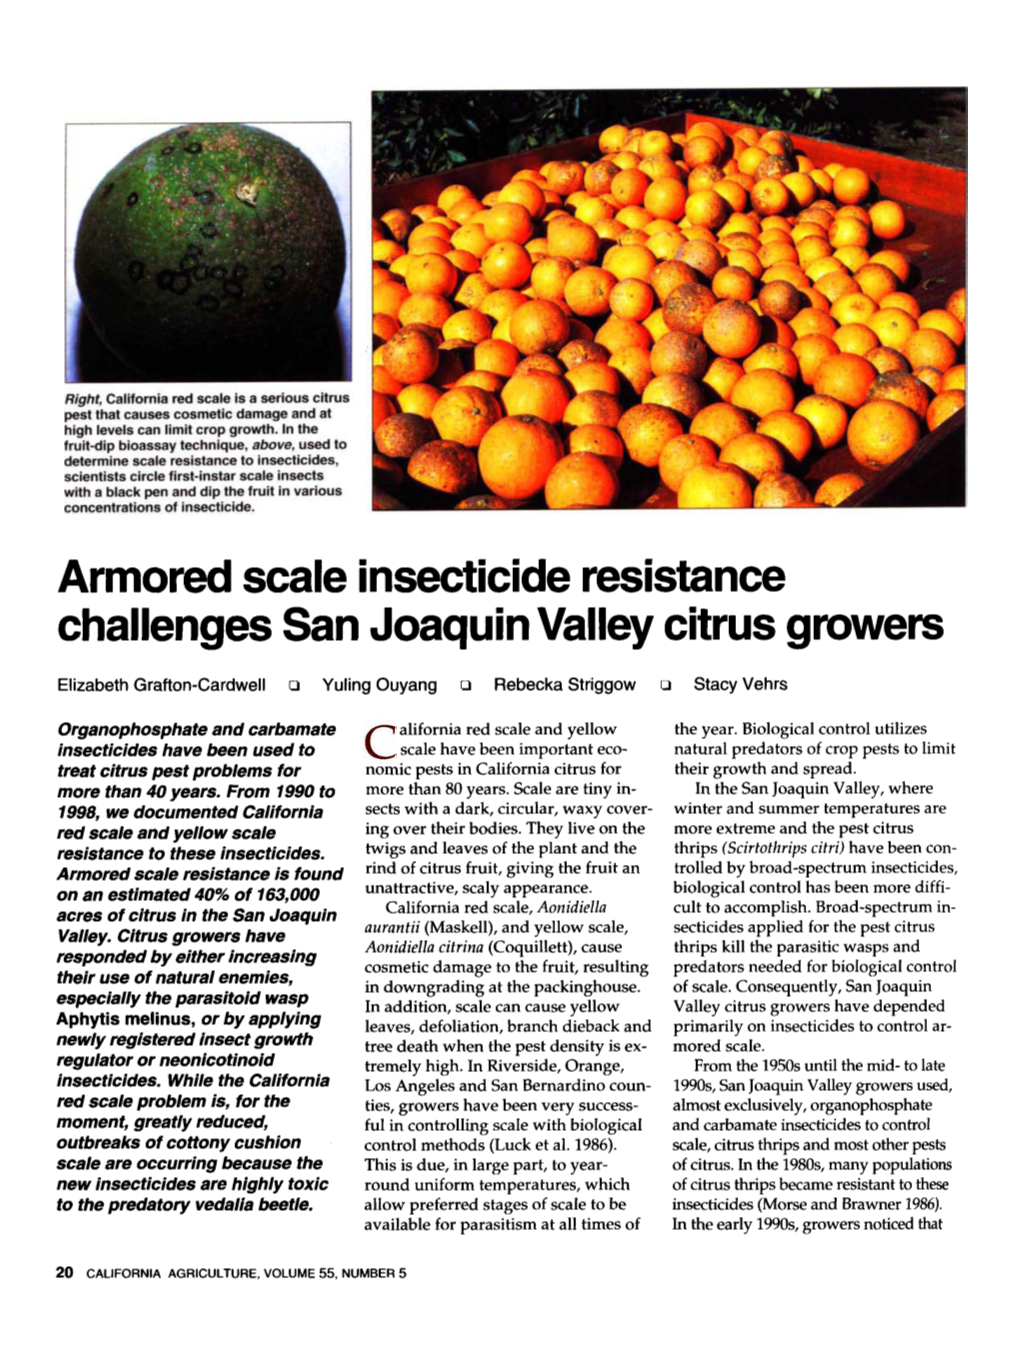 Armored Scale Insecticide Resistance Challenges San Joaquin Valley Citrus Growers